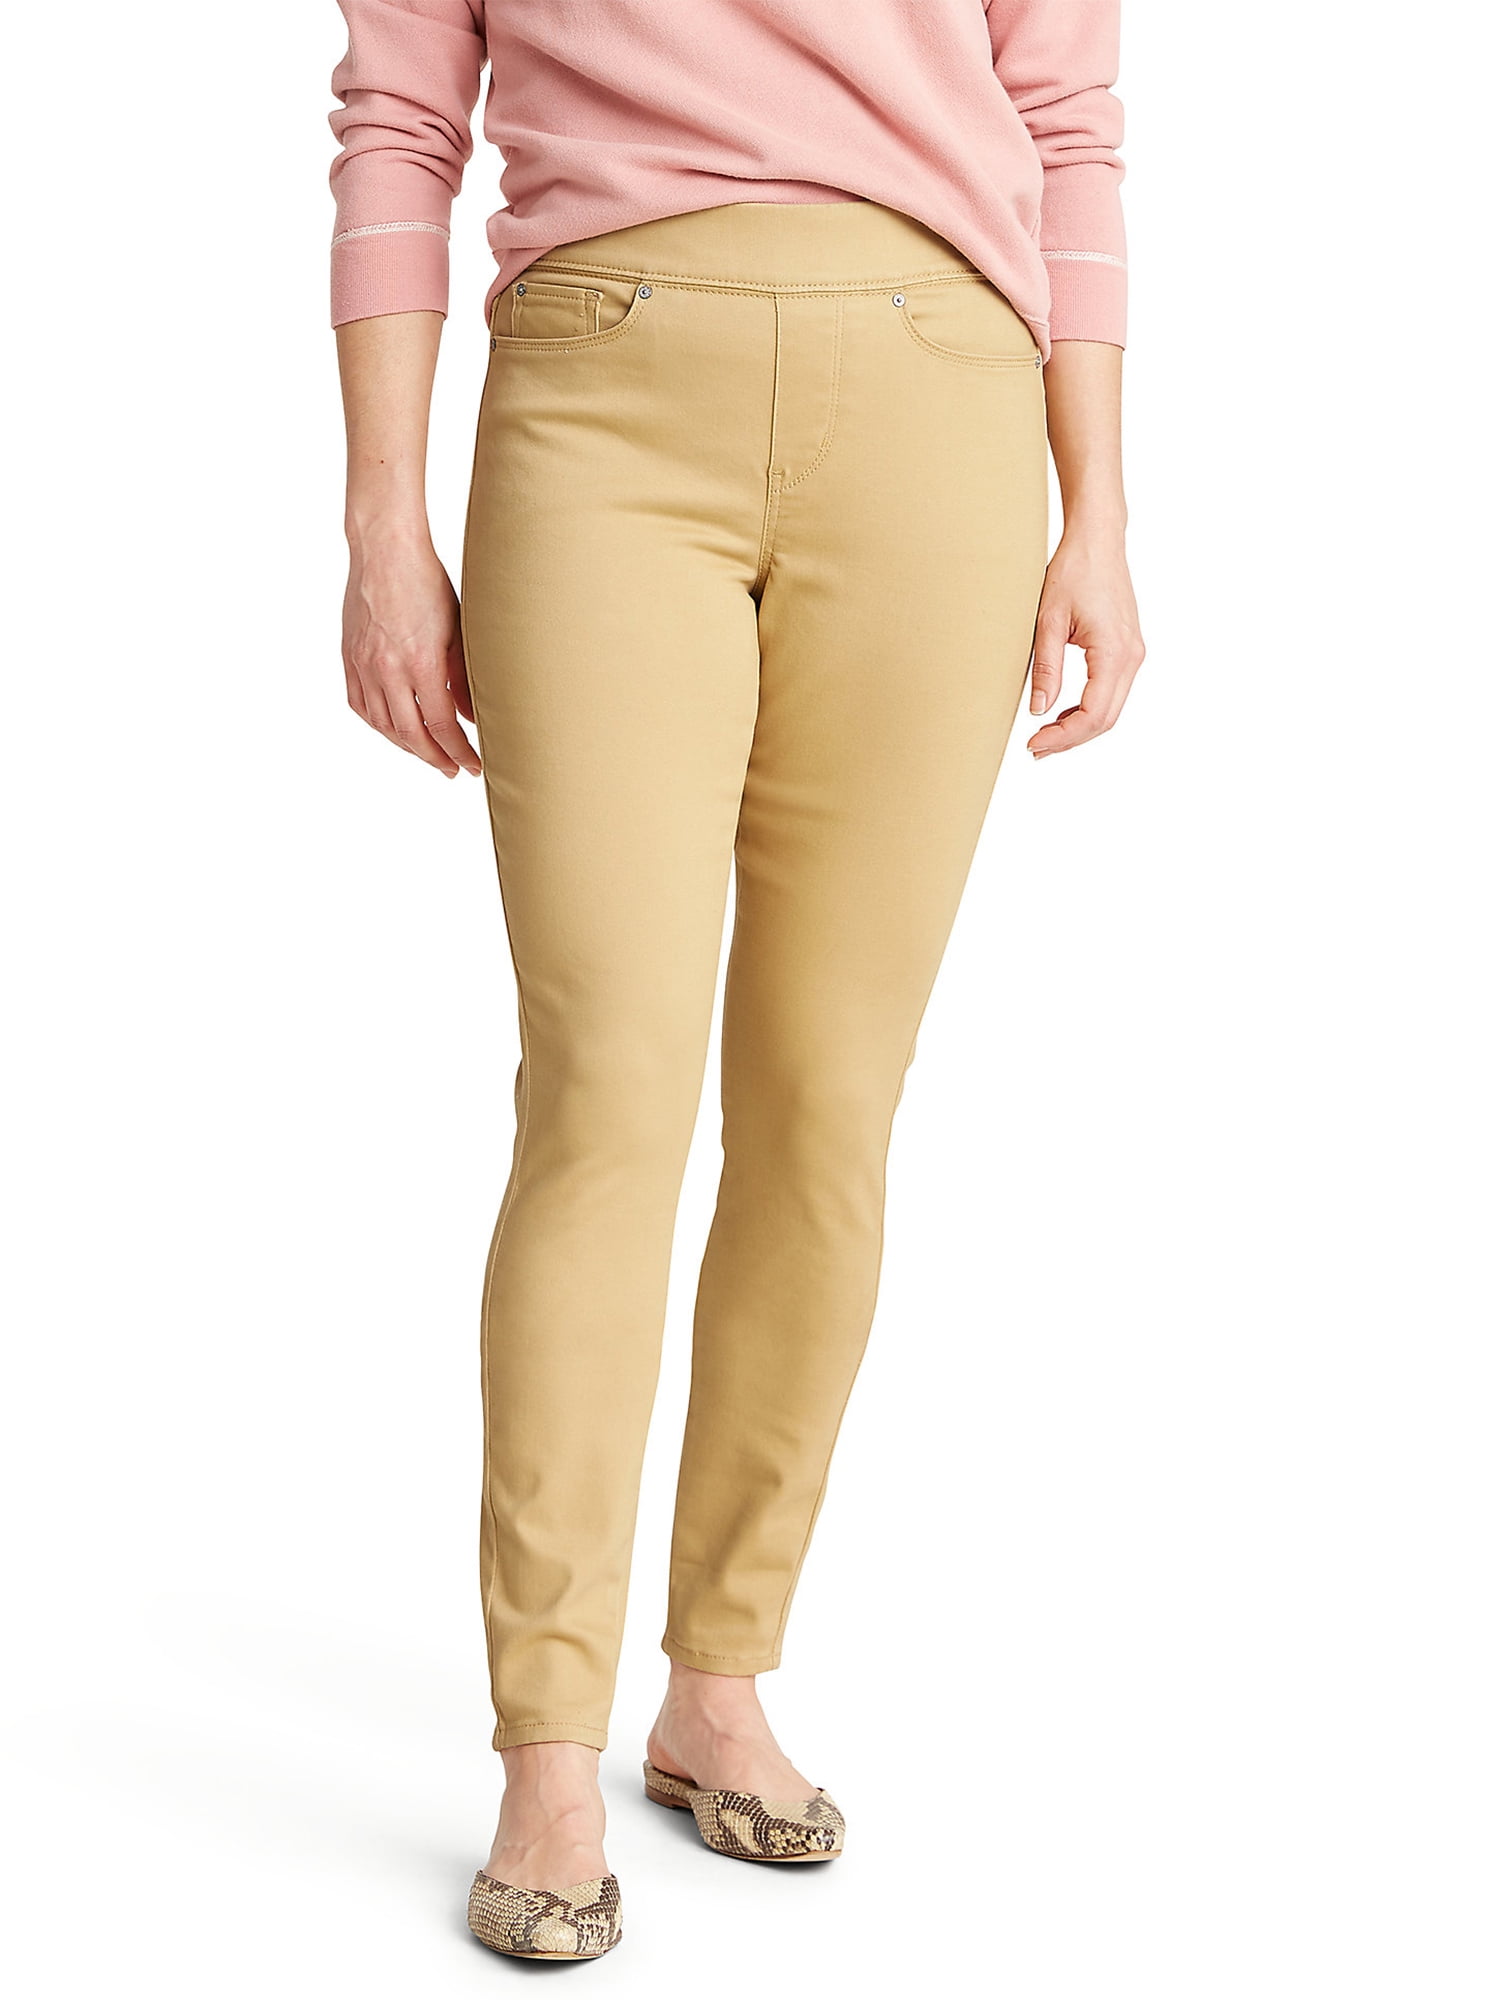 genvinde straf flertal Signature by Levi Strauss & Co. Women's Shaping Pull-On Super Skinny Jeans  - Walmart.com